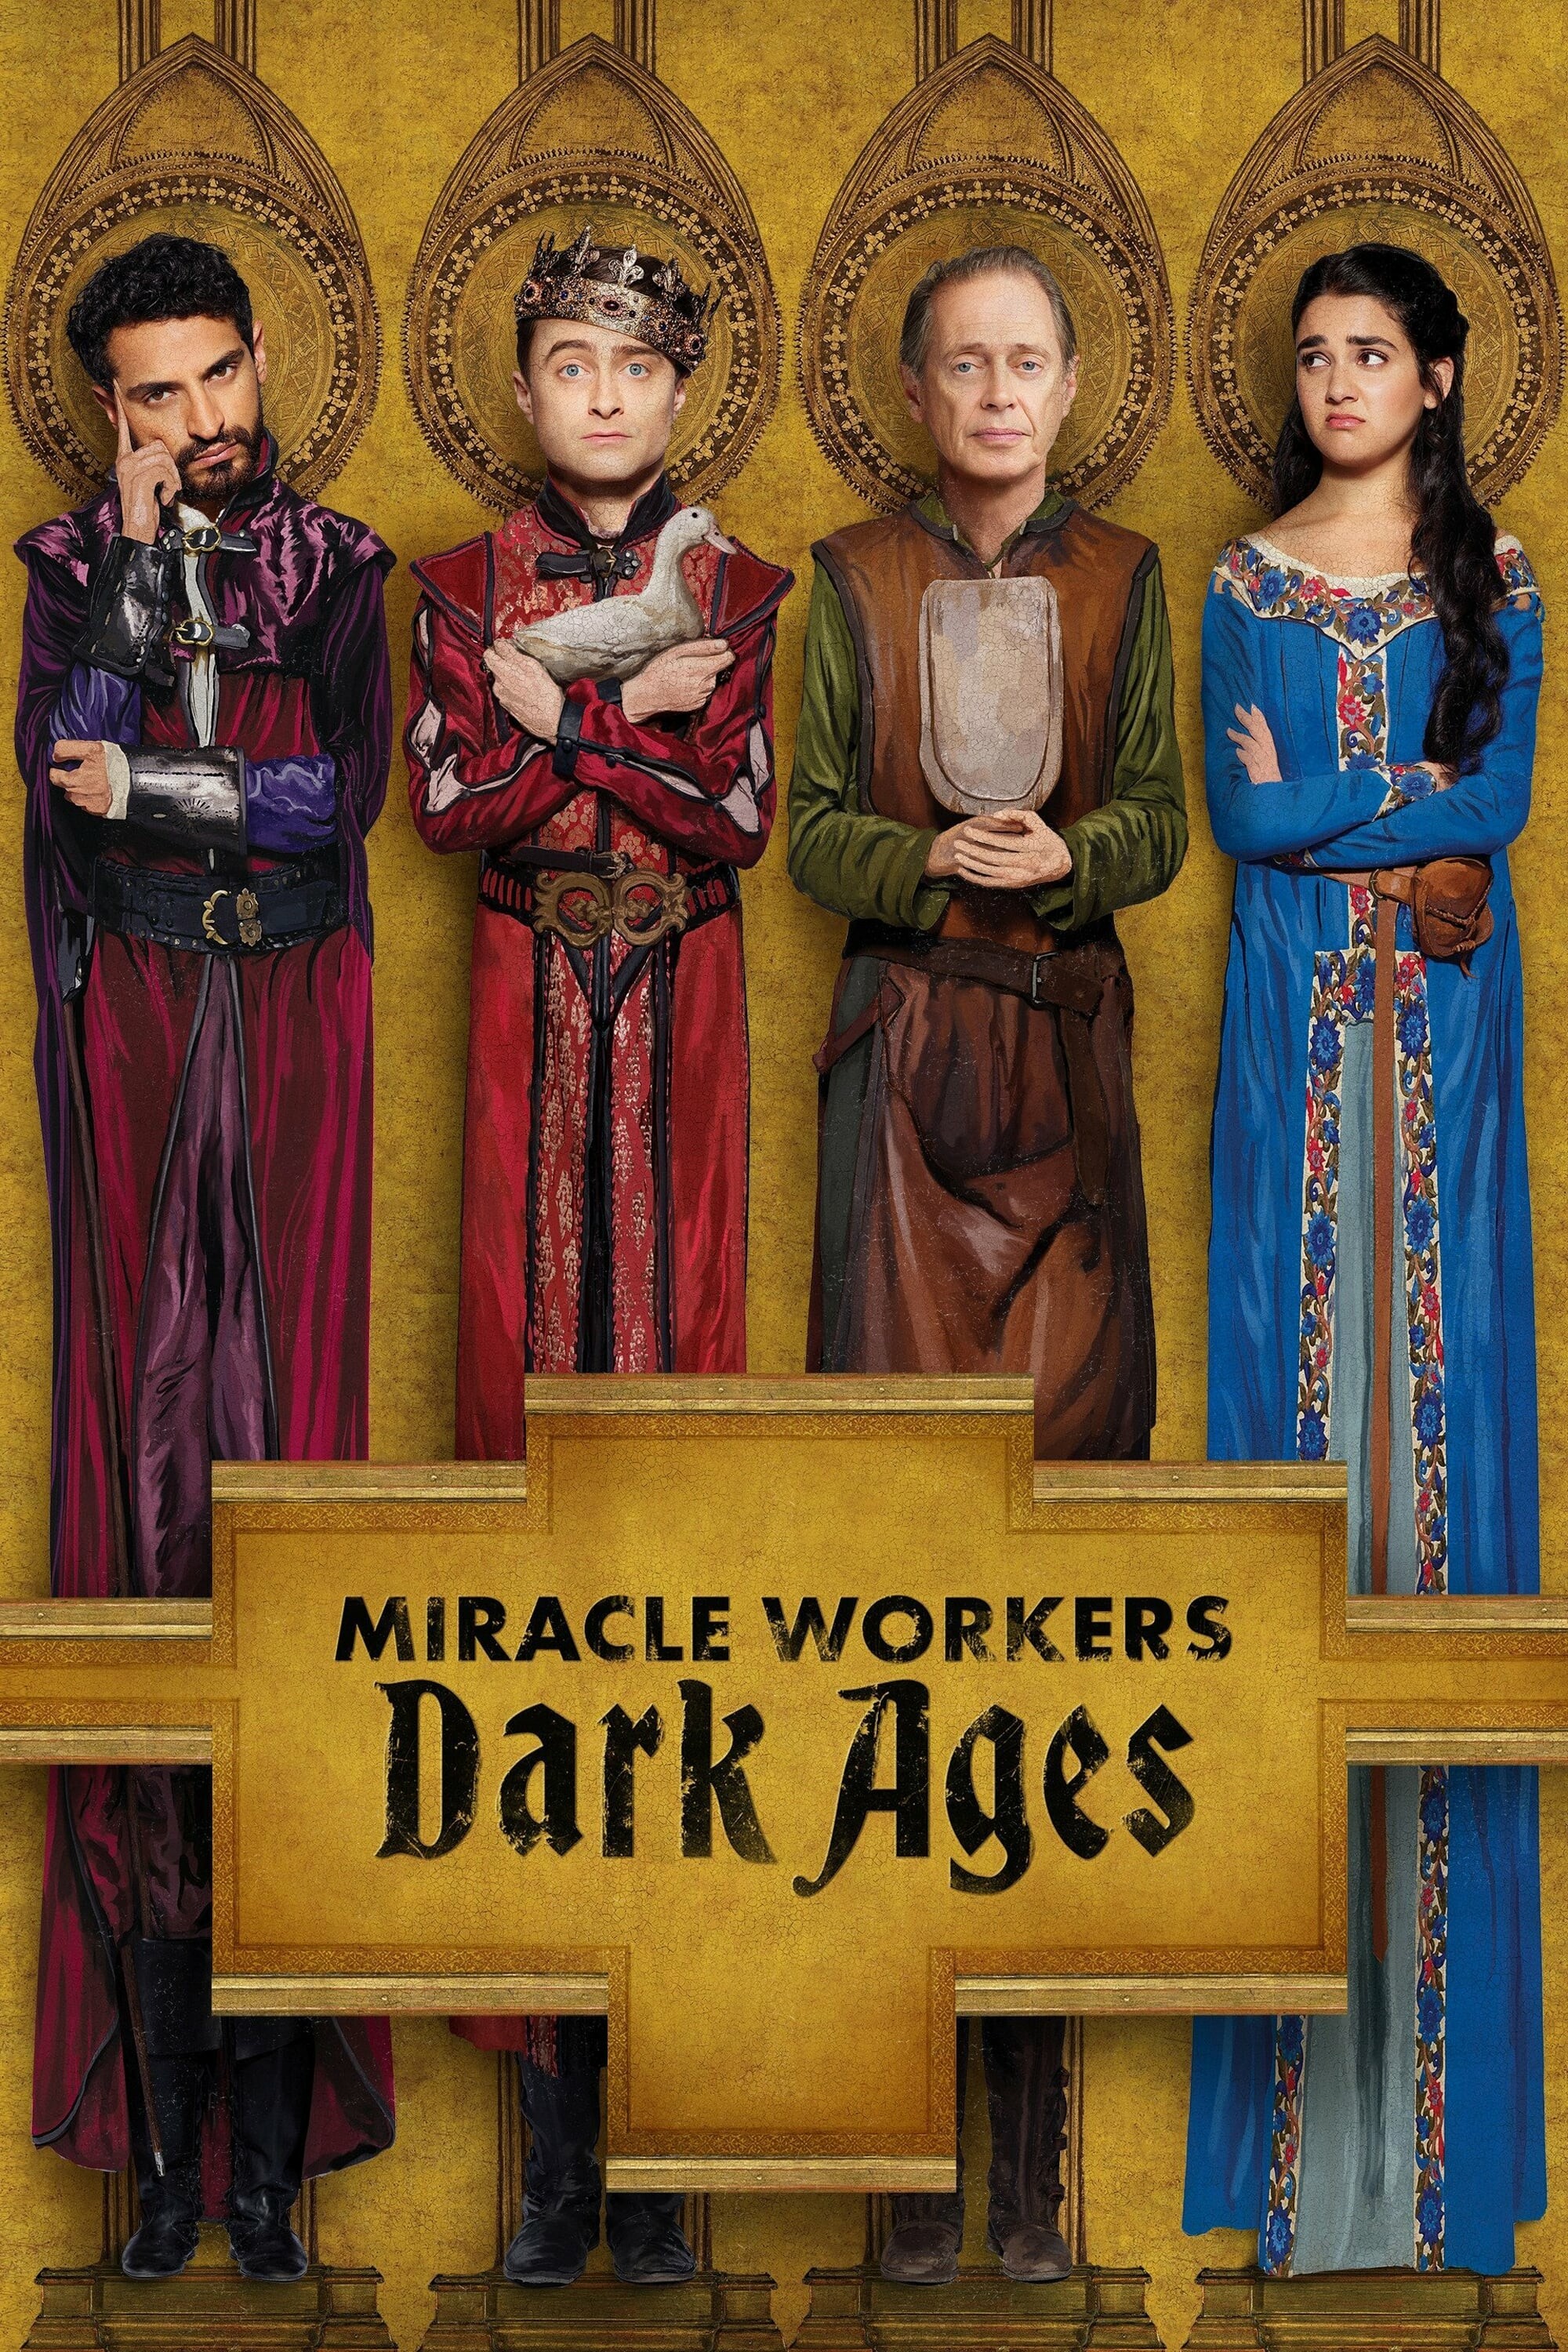 Miracle Workers: The second season, set during the Dark Ages, Based on Rich's short story "Revolution". 2000x3000 HD Wallpaper.